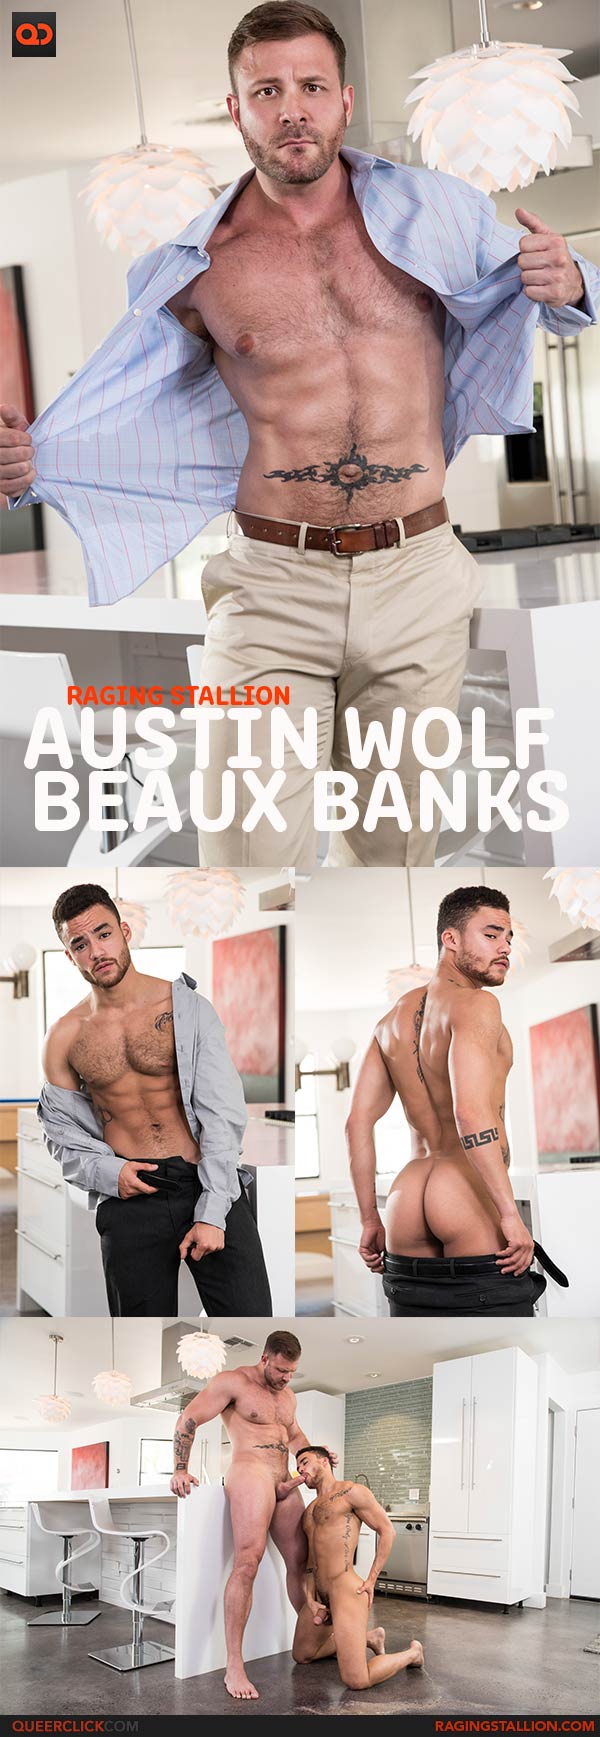 Raging Stallion: Austin Wolf and Beaux Banks